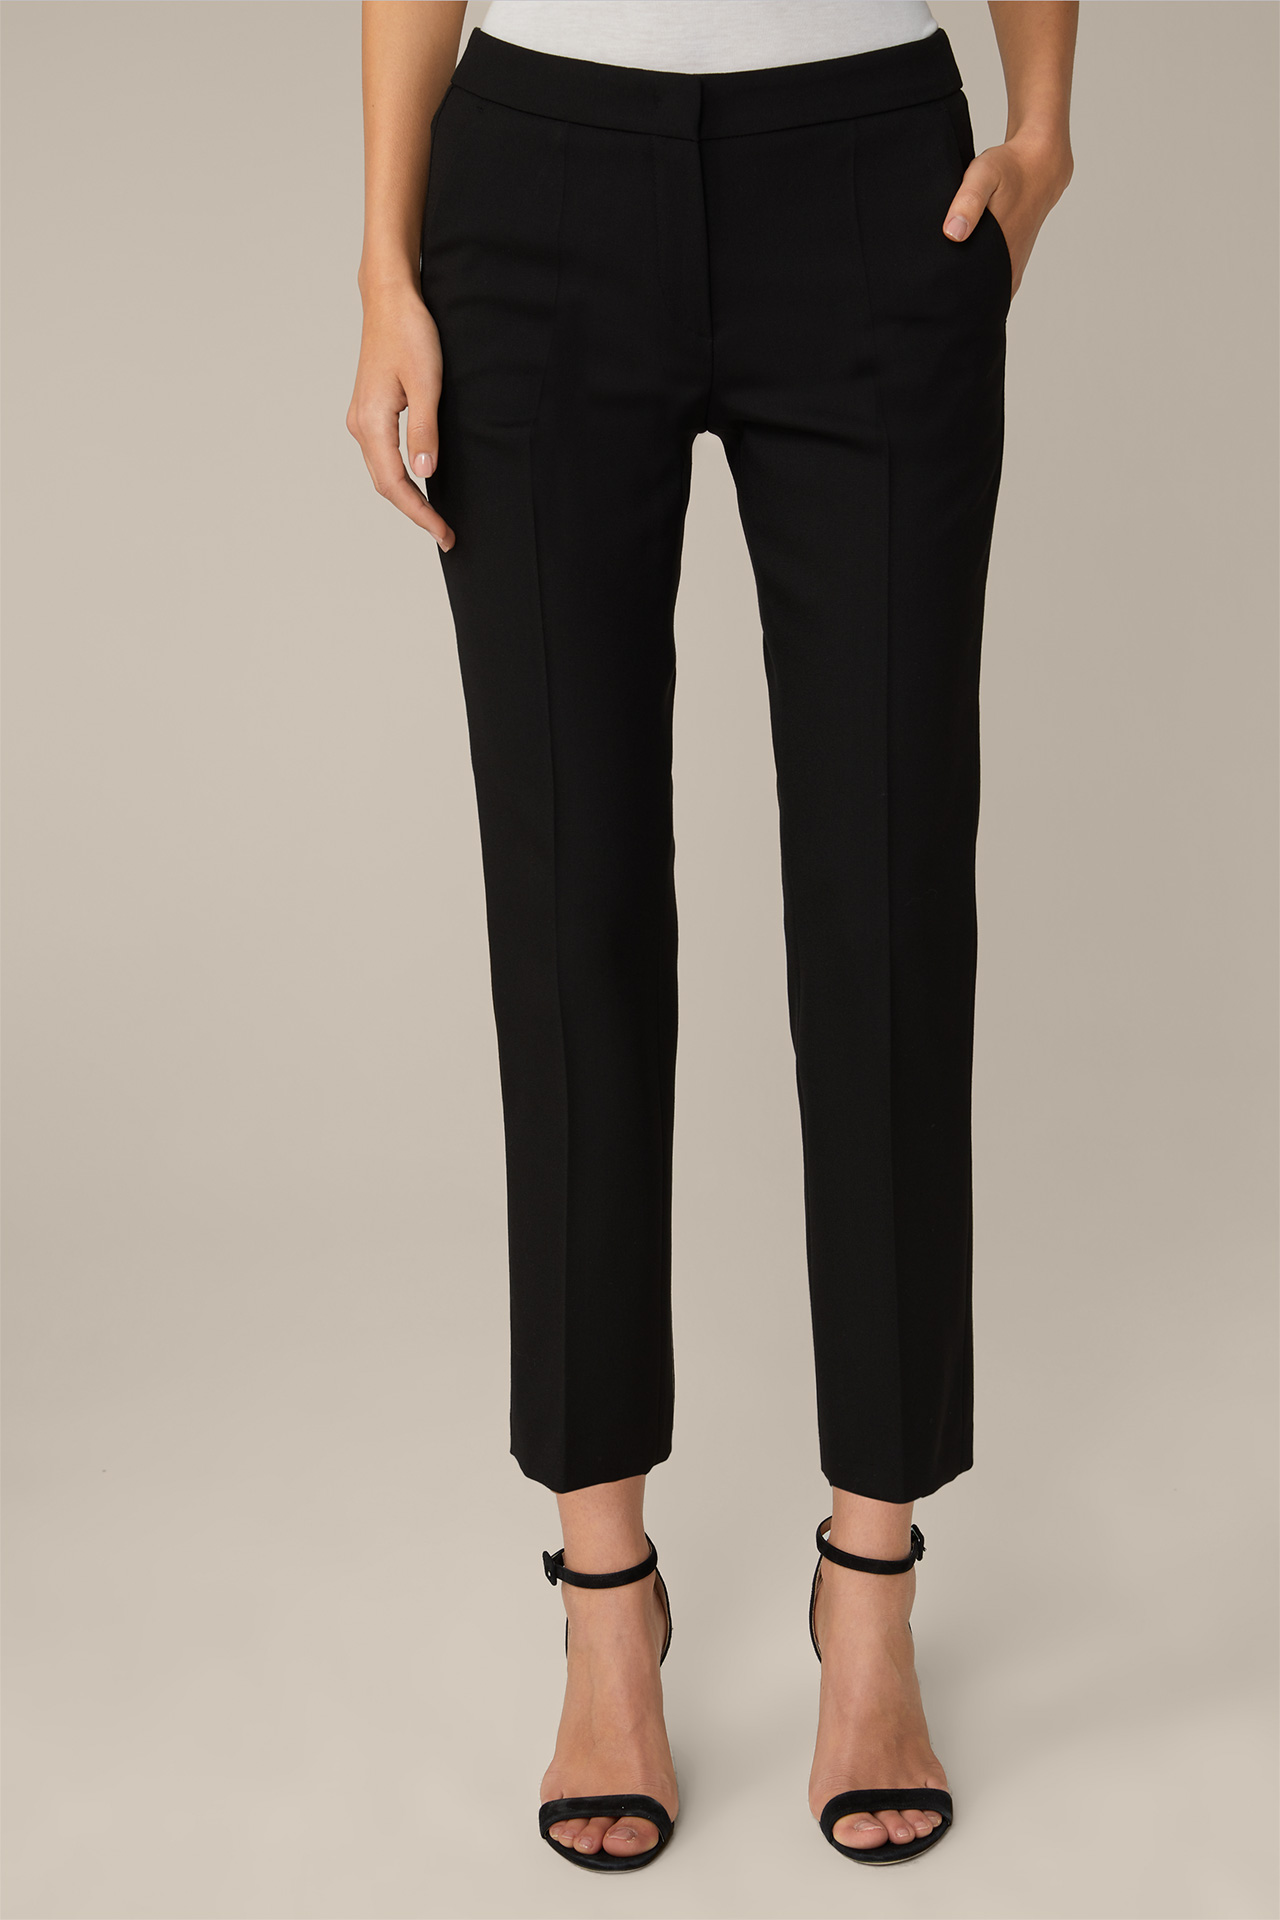 Stretch Virgin Wool Trousers, cropped, in black